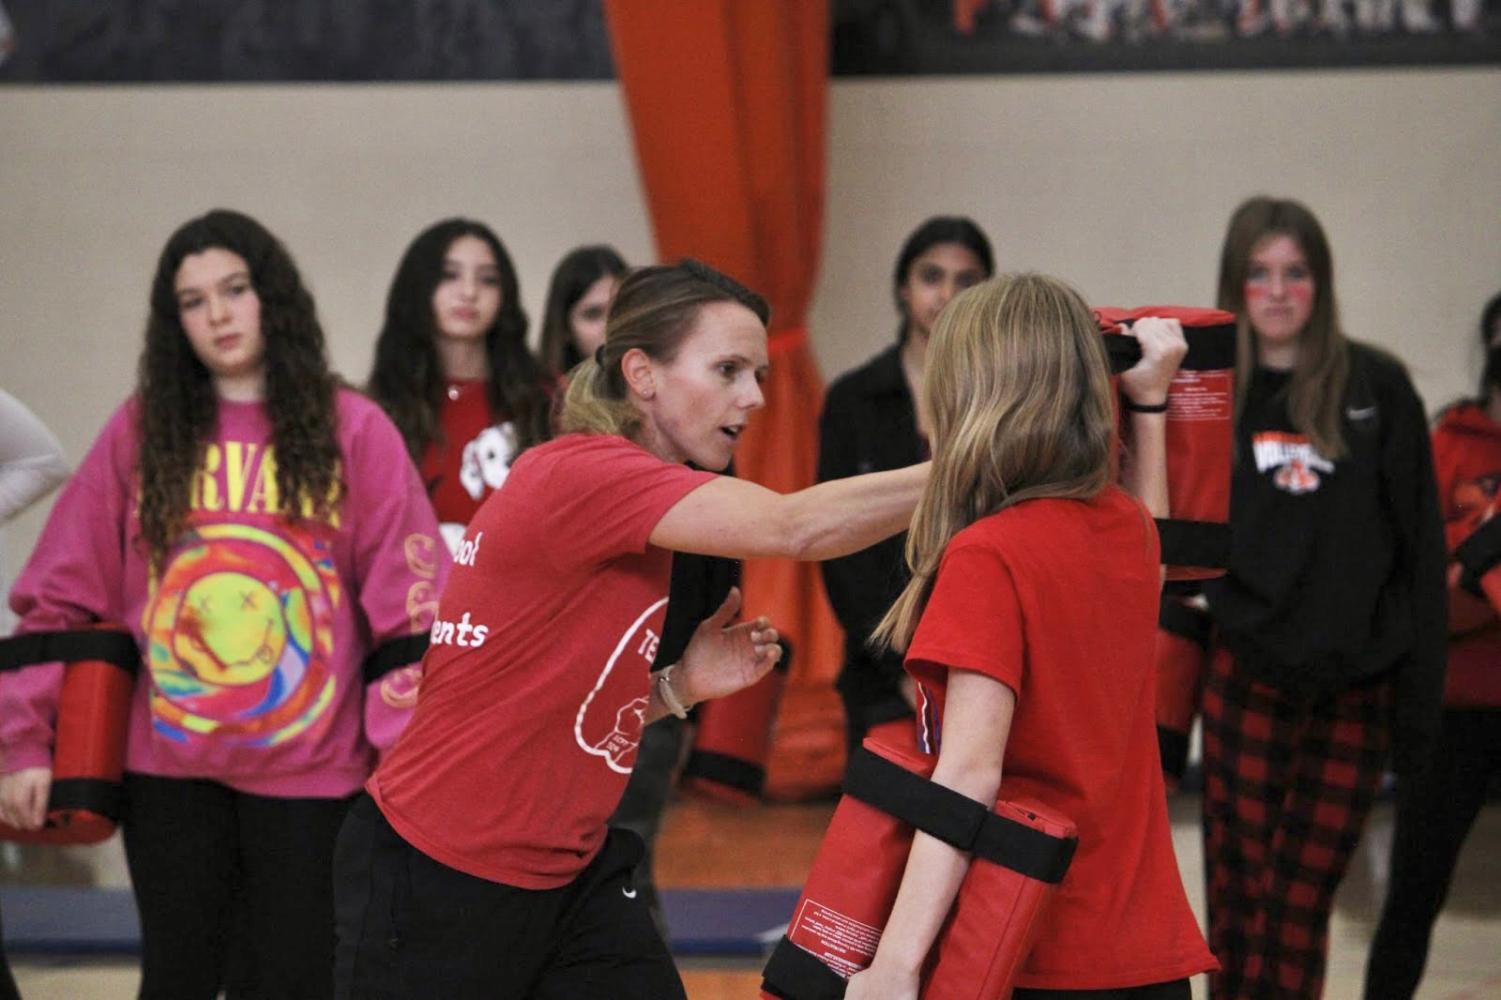 Professional Self-Defense Training At School Name In City, State